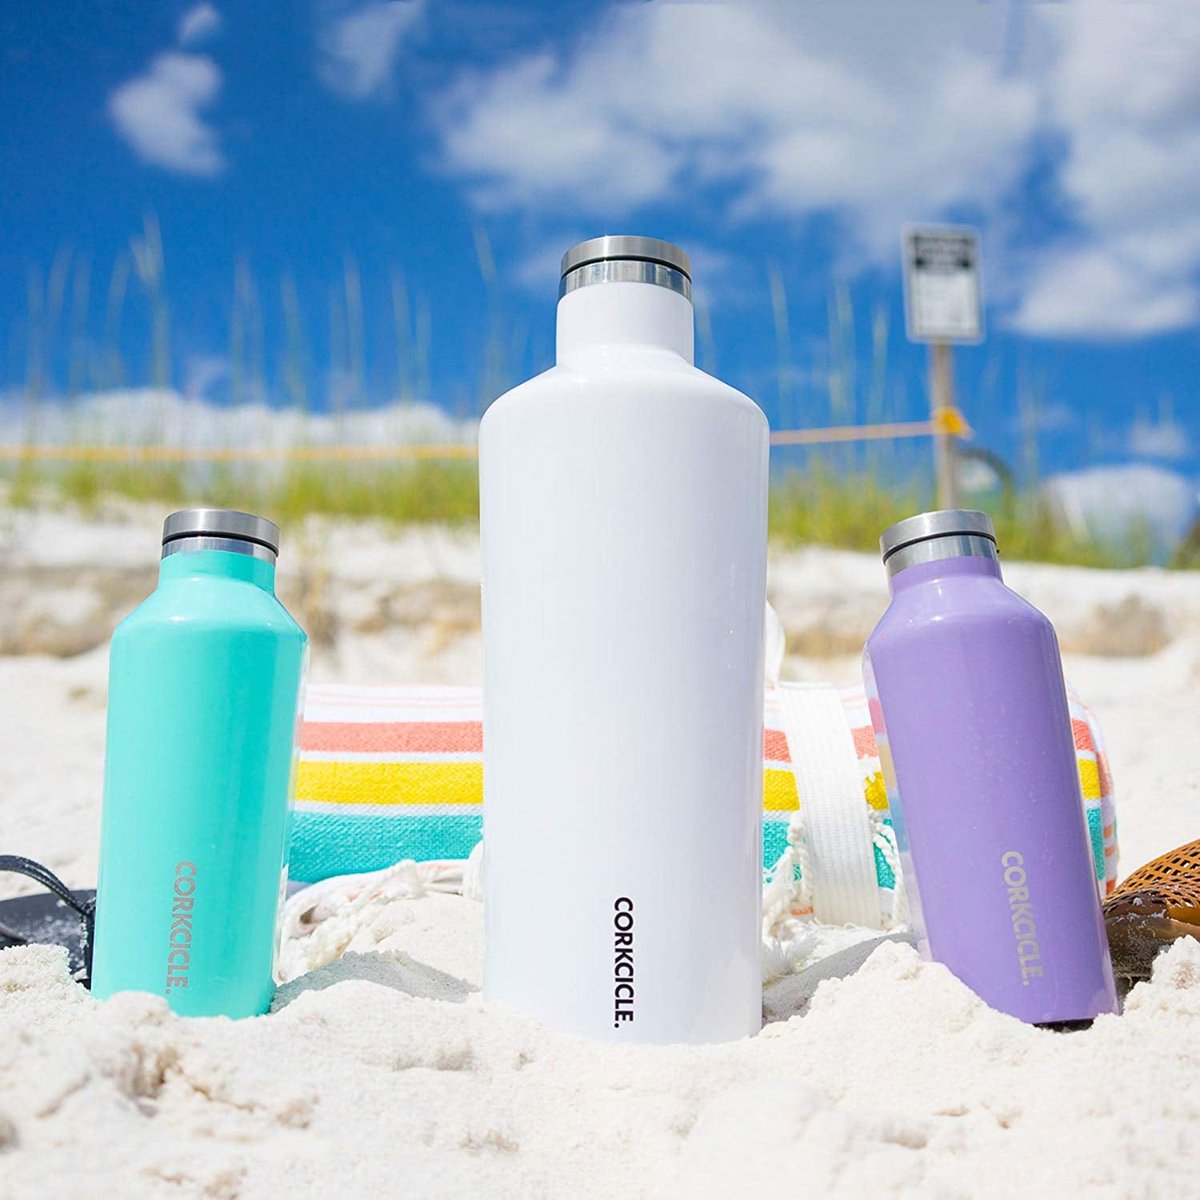 Reusable water bottles!  An obvious one but super important. 80% of plastic water bottles end up in landfills and reusable ones are so much cuter 